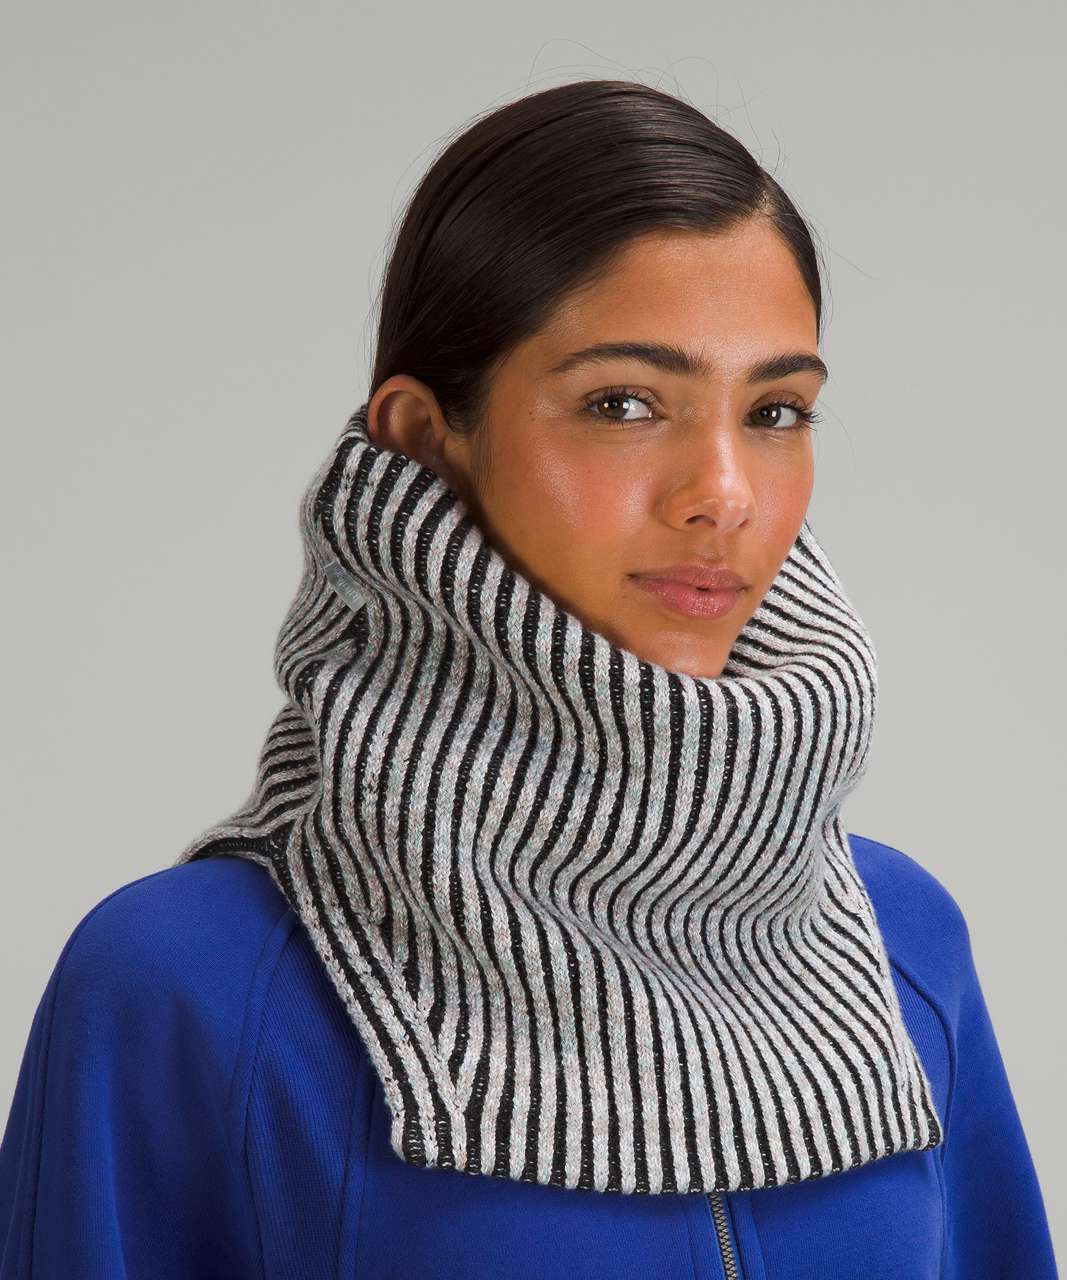 Navy Blue and White Scarf - Printed Handkerchief Scarf - Scarf - Lulus